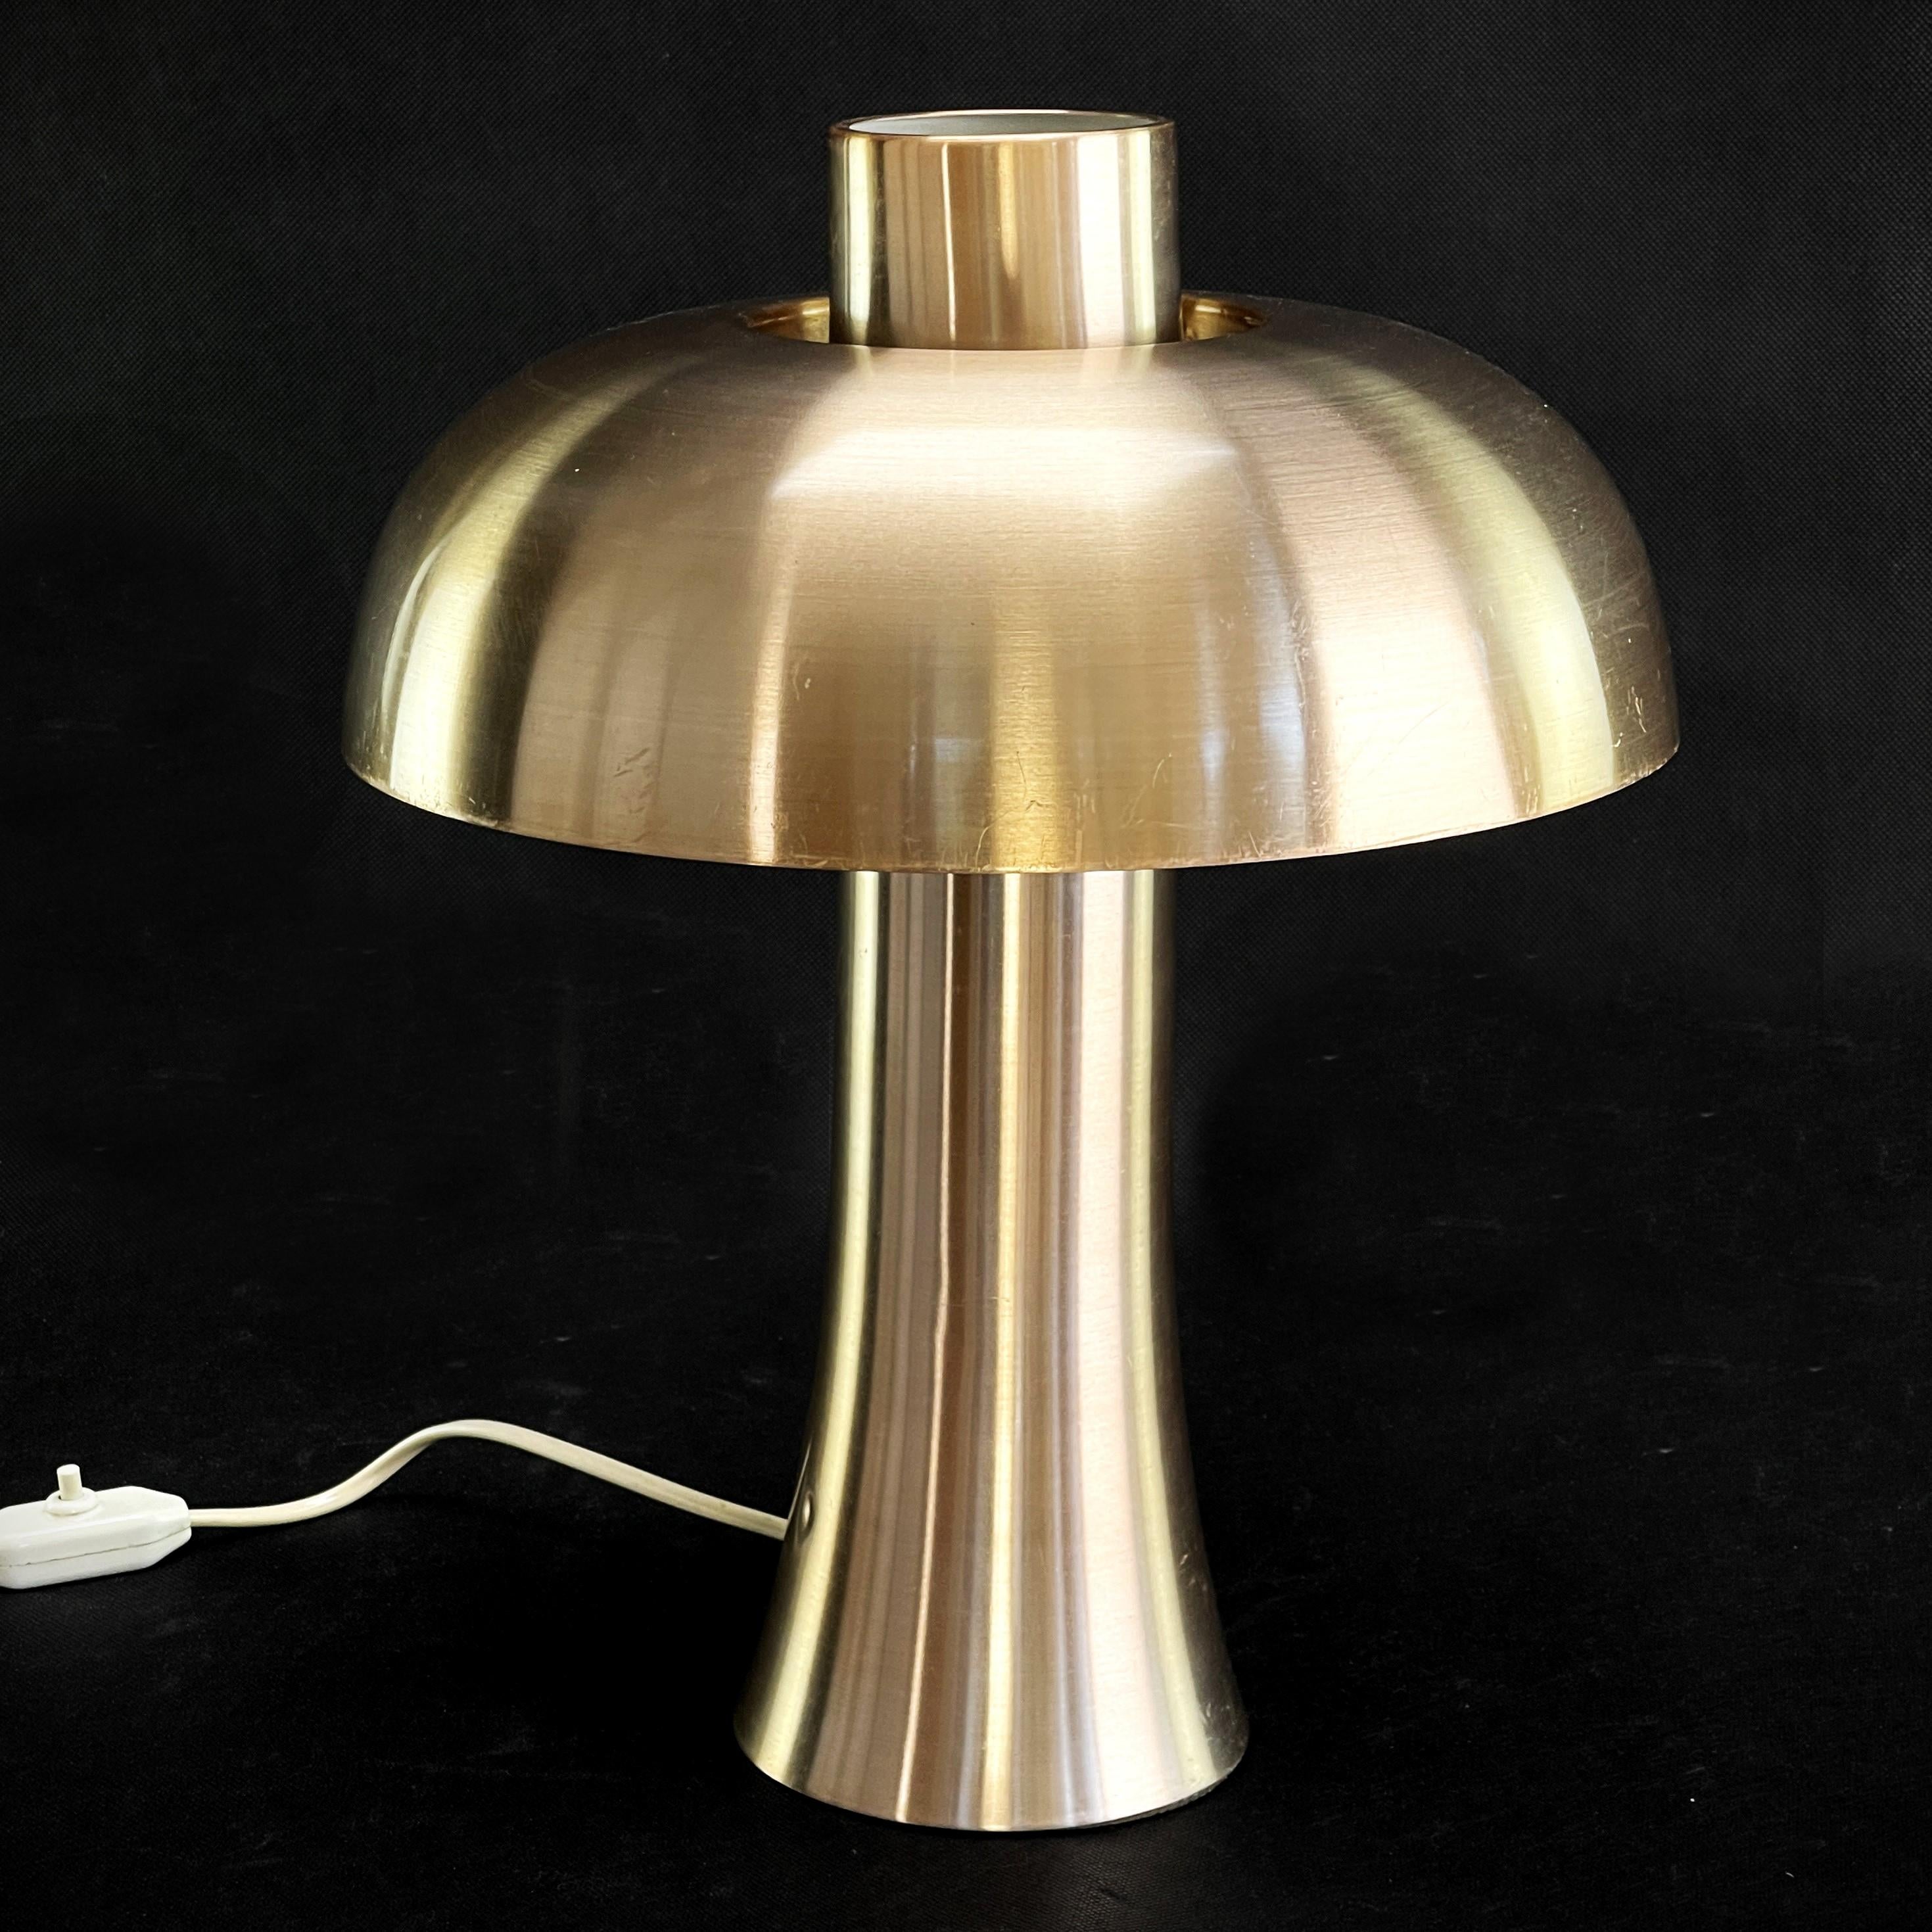 Doria Aluminium Table Lamp - 1970s

The Doria Mushroom table lamp from the 1970s is a true classic of retro design. This table lamp impresses with its anodised copper-coloured surface made of brushed aluminium, which gives it a noble look. The